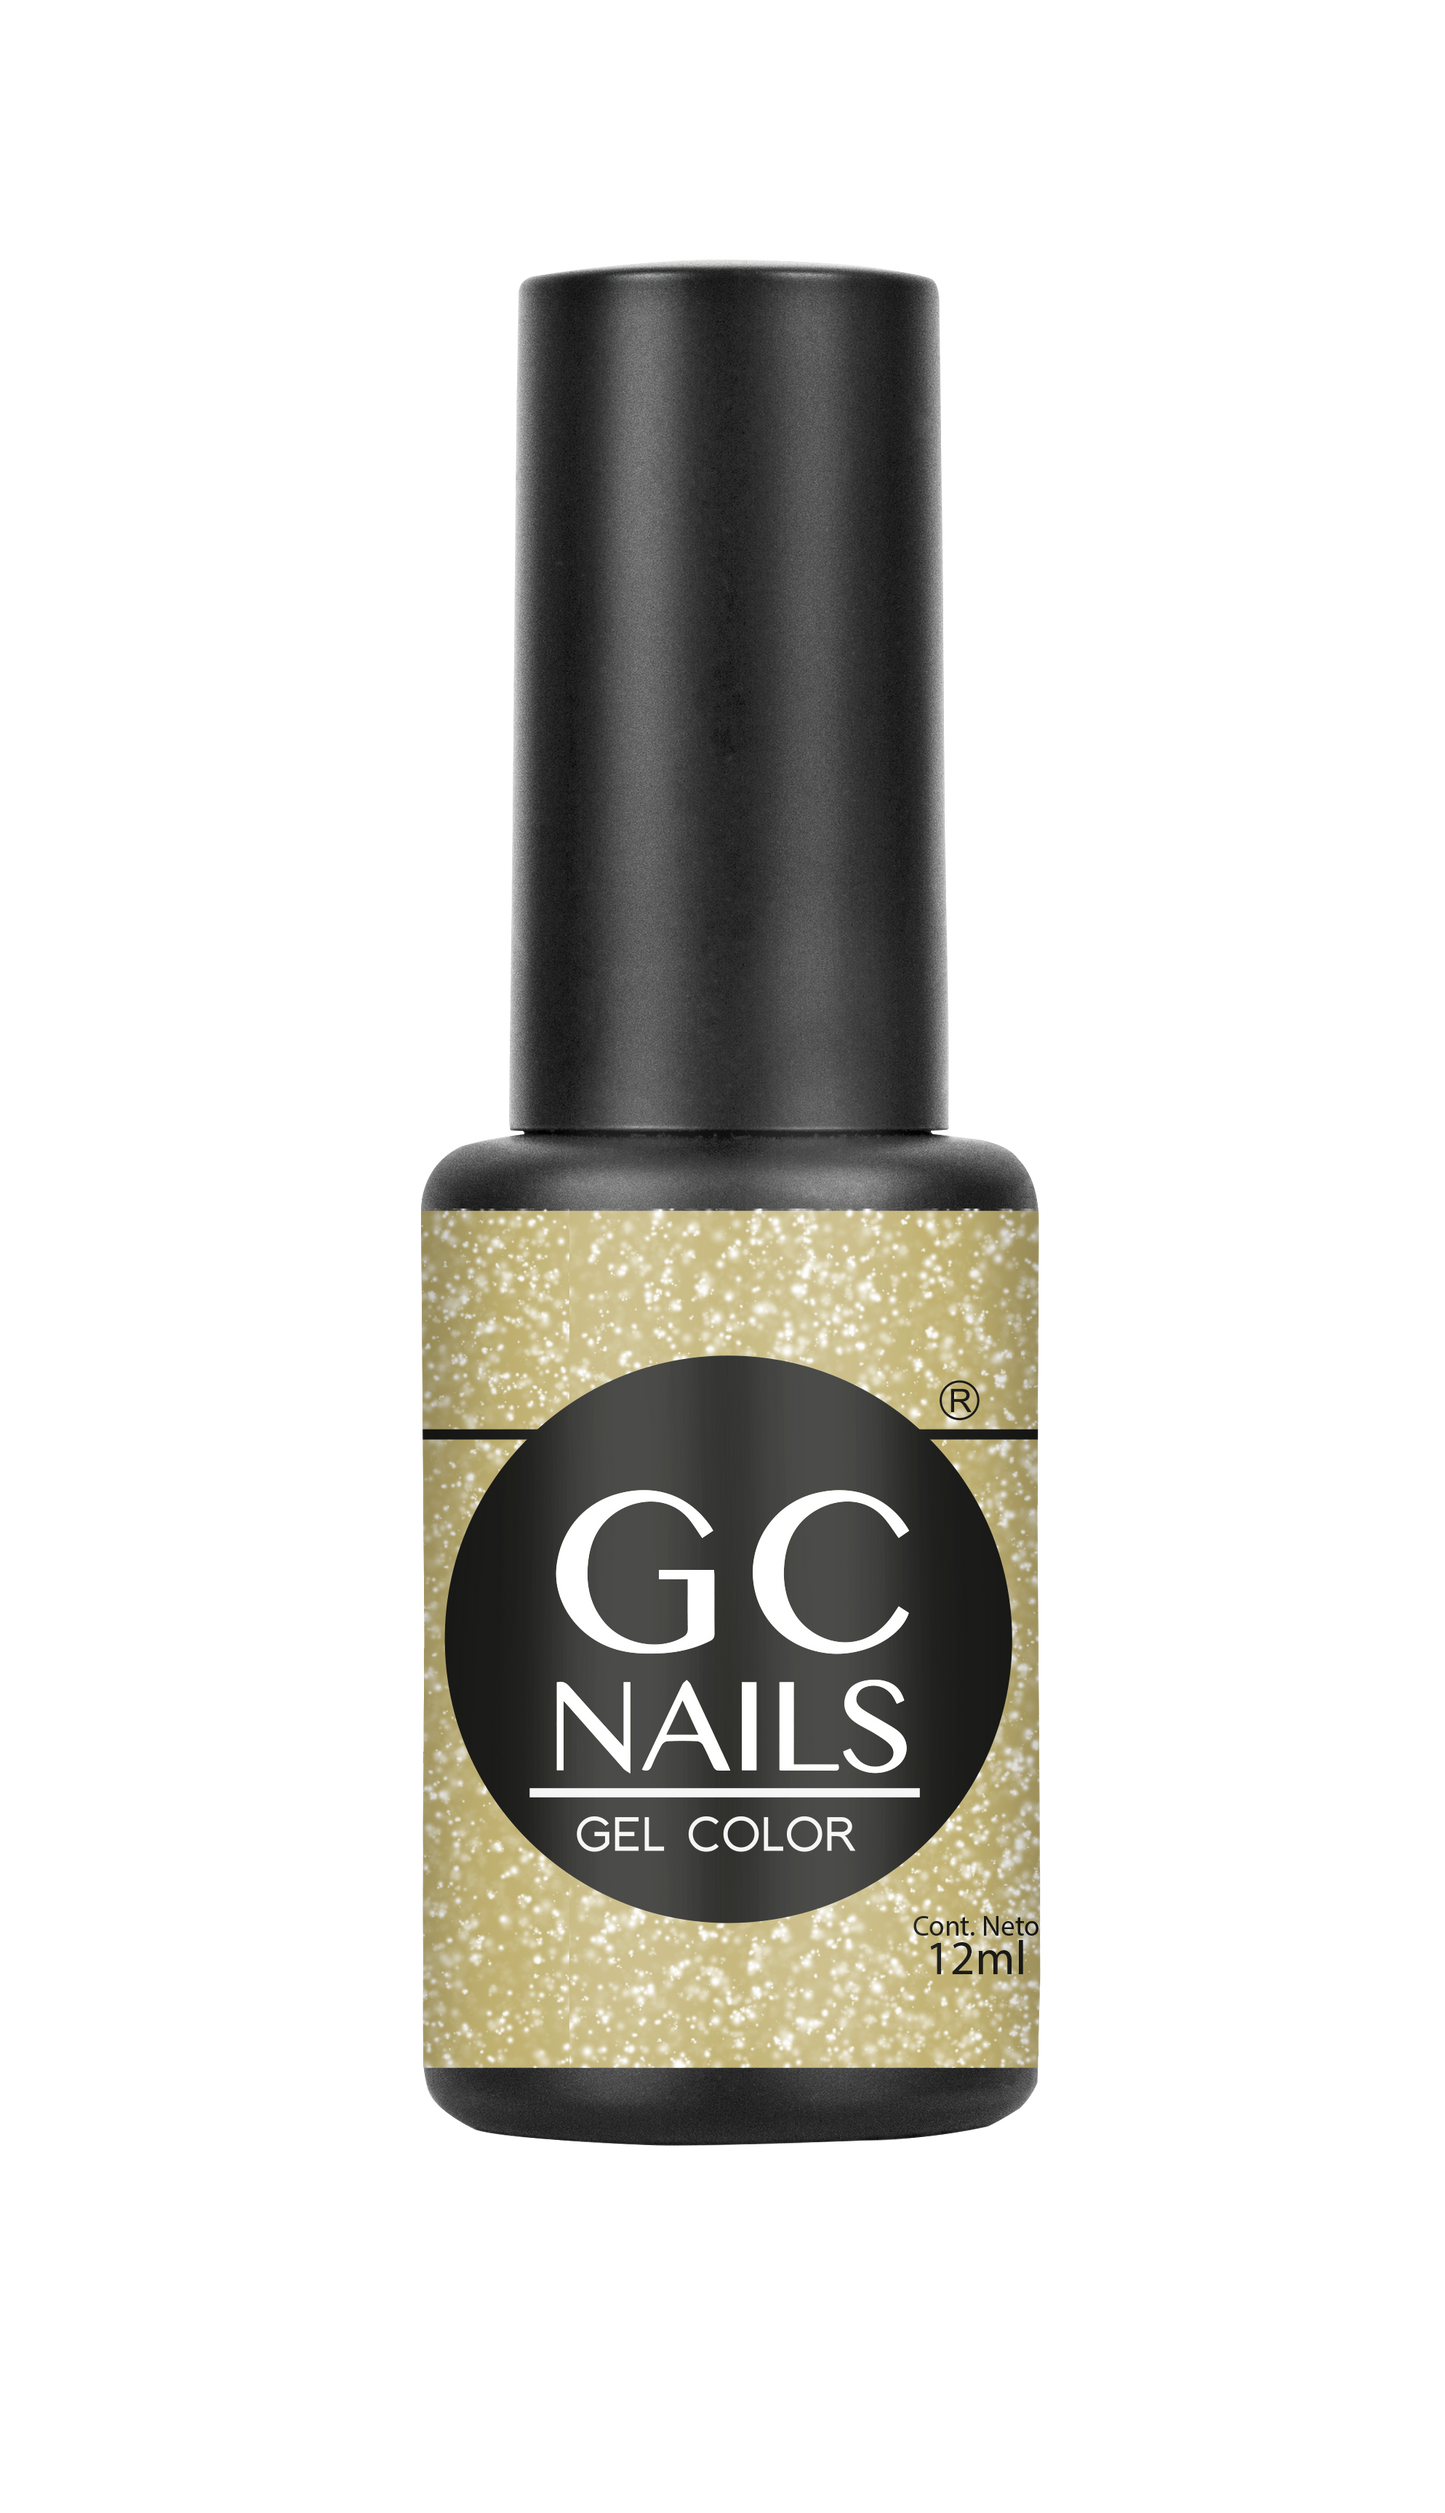 GC nails bel-color 12ml  CURRY 99